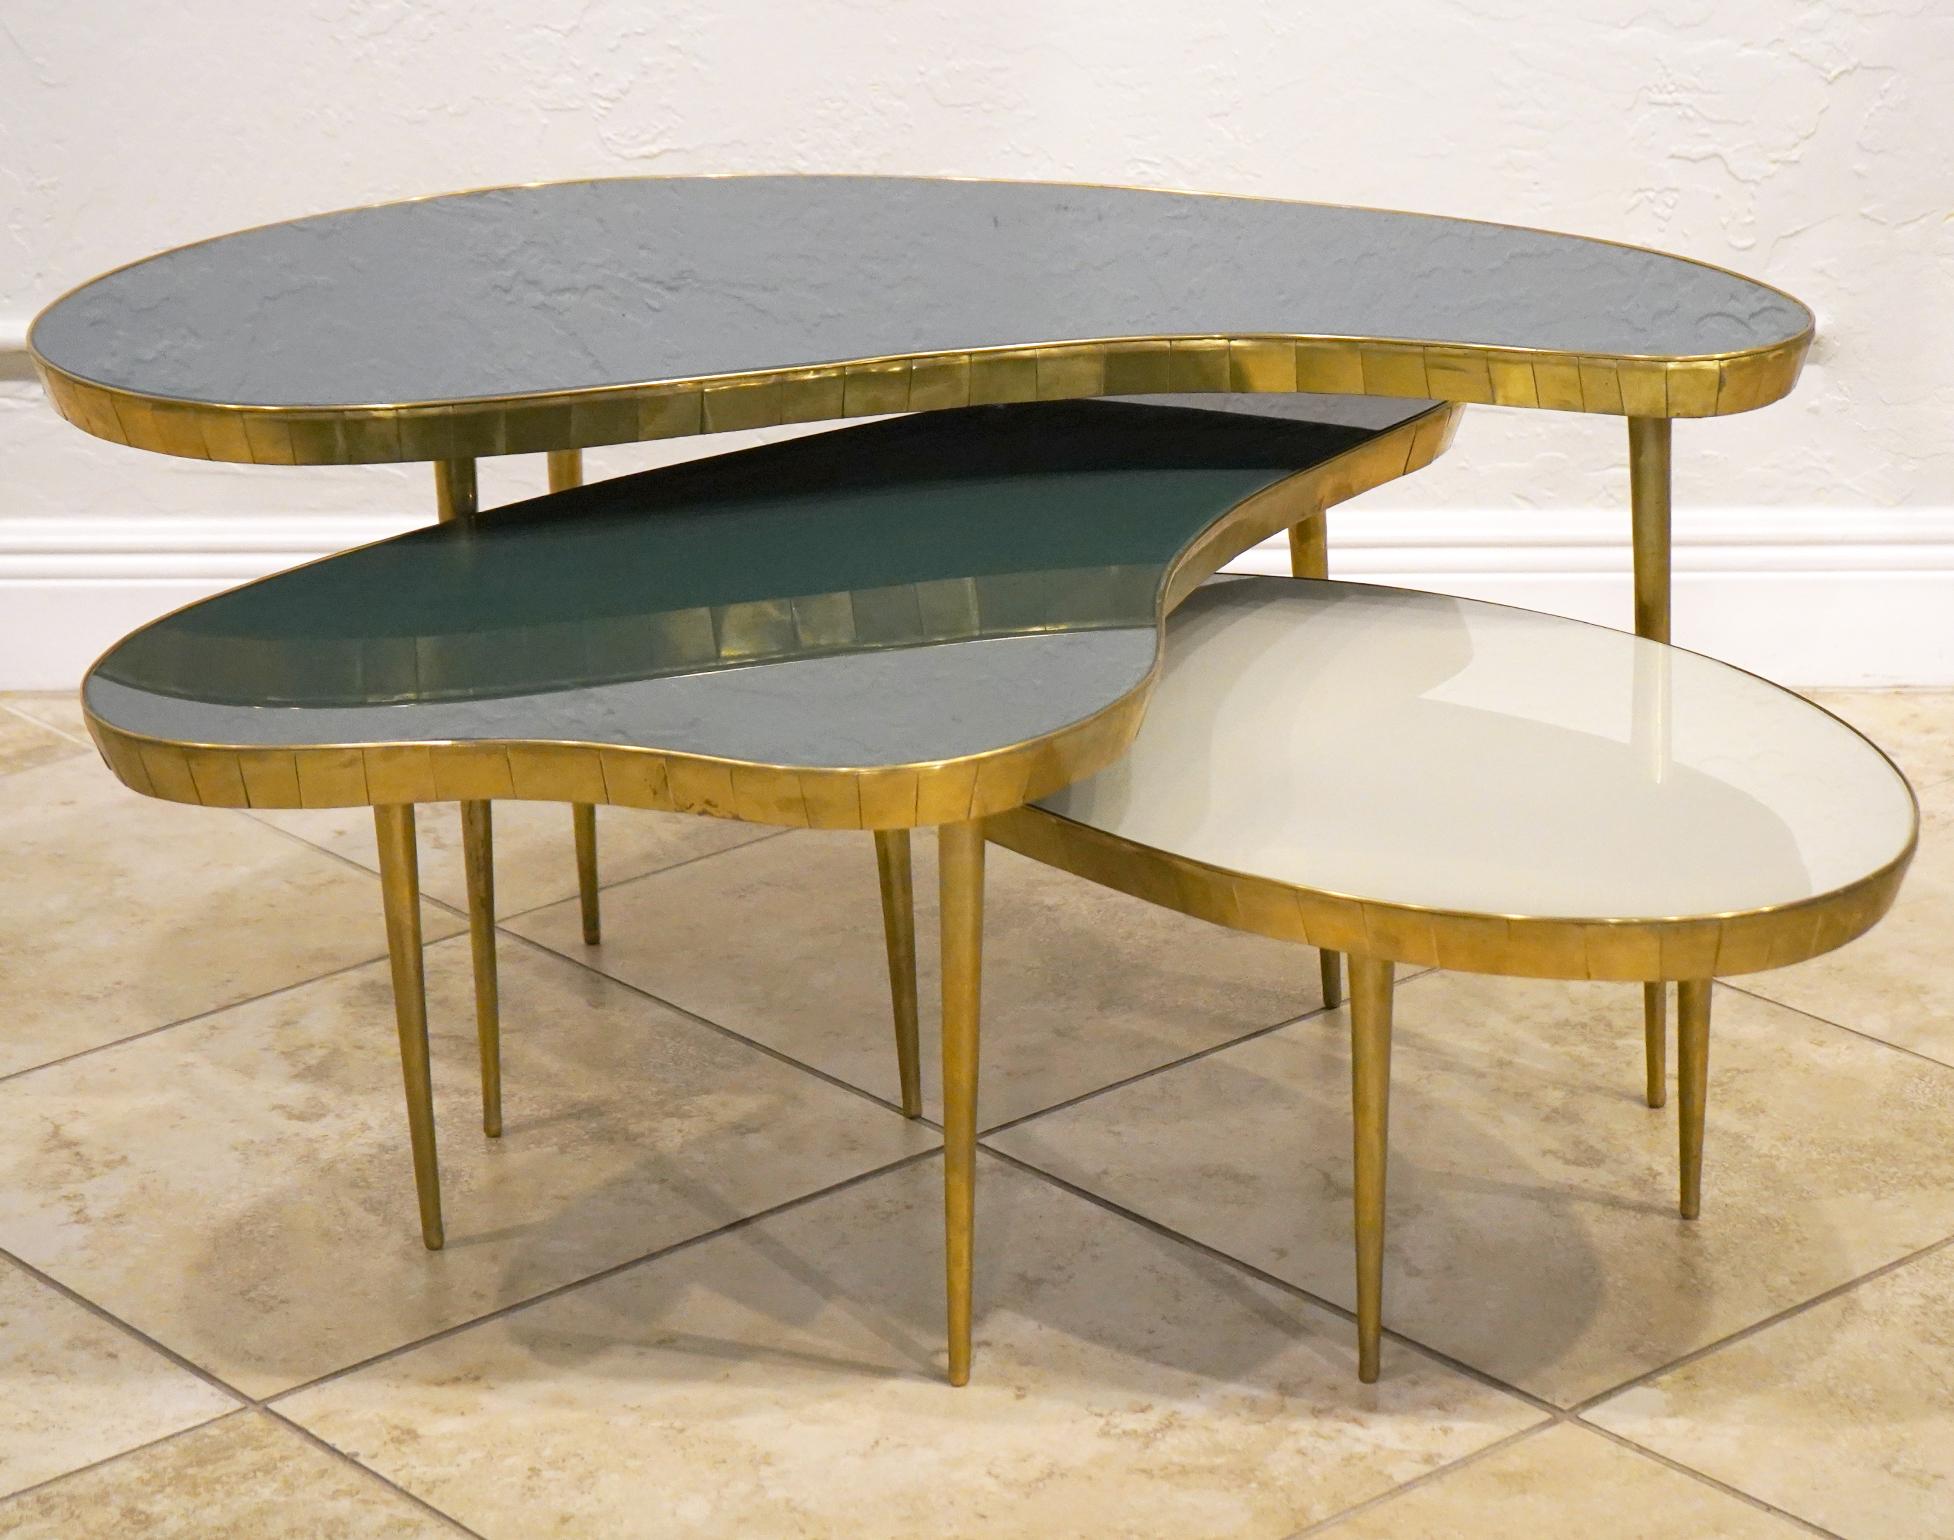 Unique set of Italian brass and glass stacking tables. Can be arranged in different directions to create a fun and interesting look. Each table gets gradually smaller and has different colored glass tops.